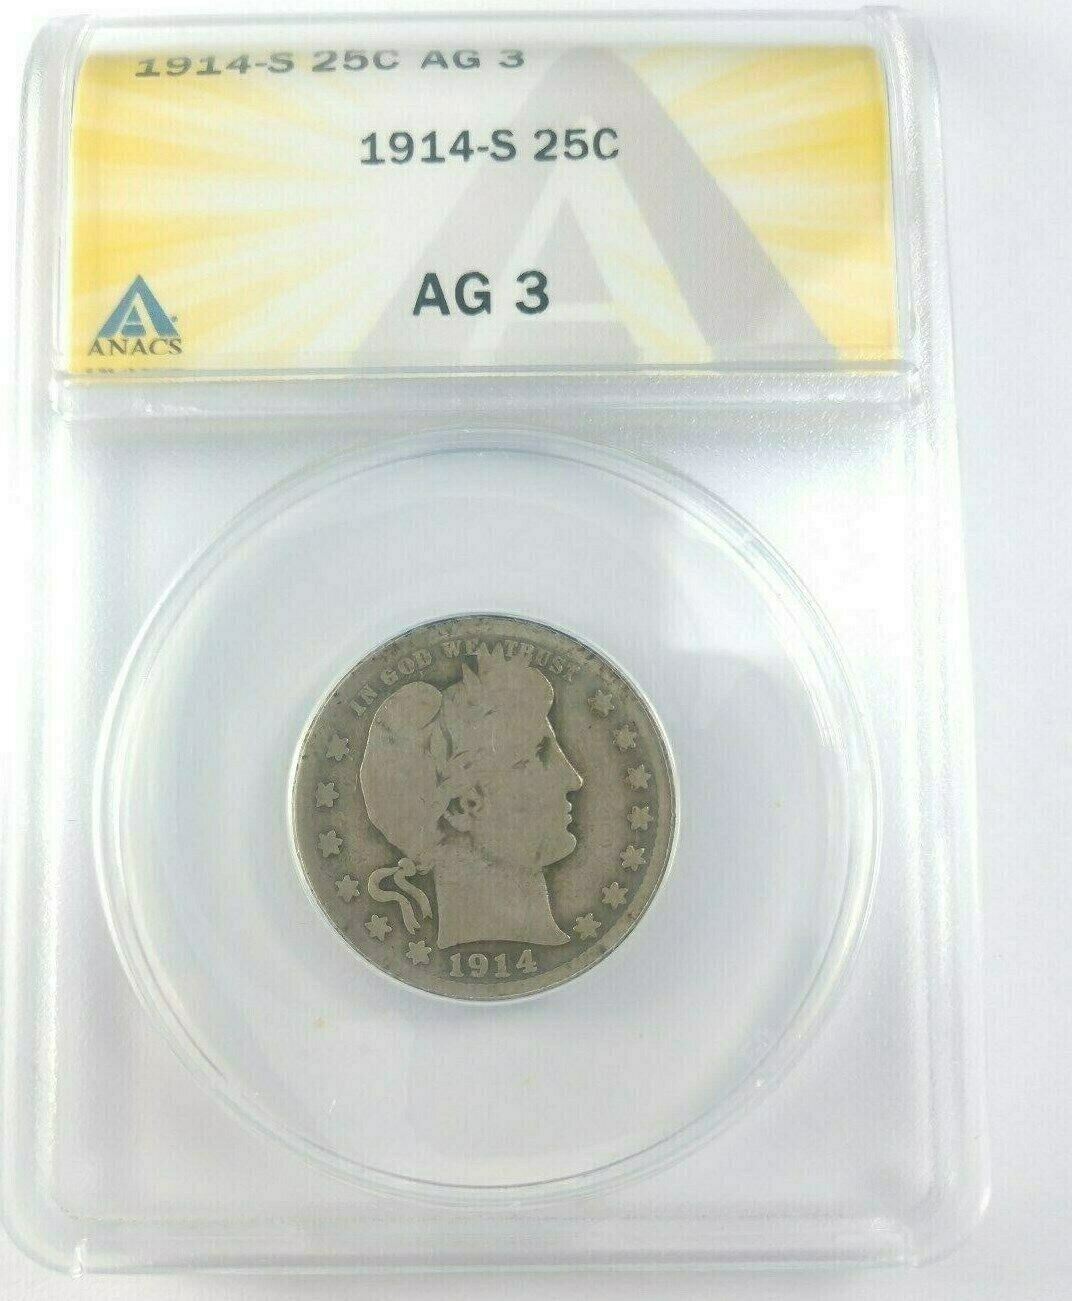 1914-S Barber Quarter - ANACS AG03 - LOW MINTAGE OF ONLY 264,000!